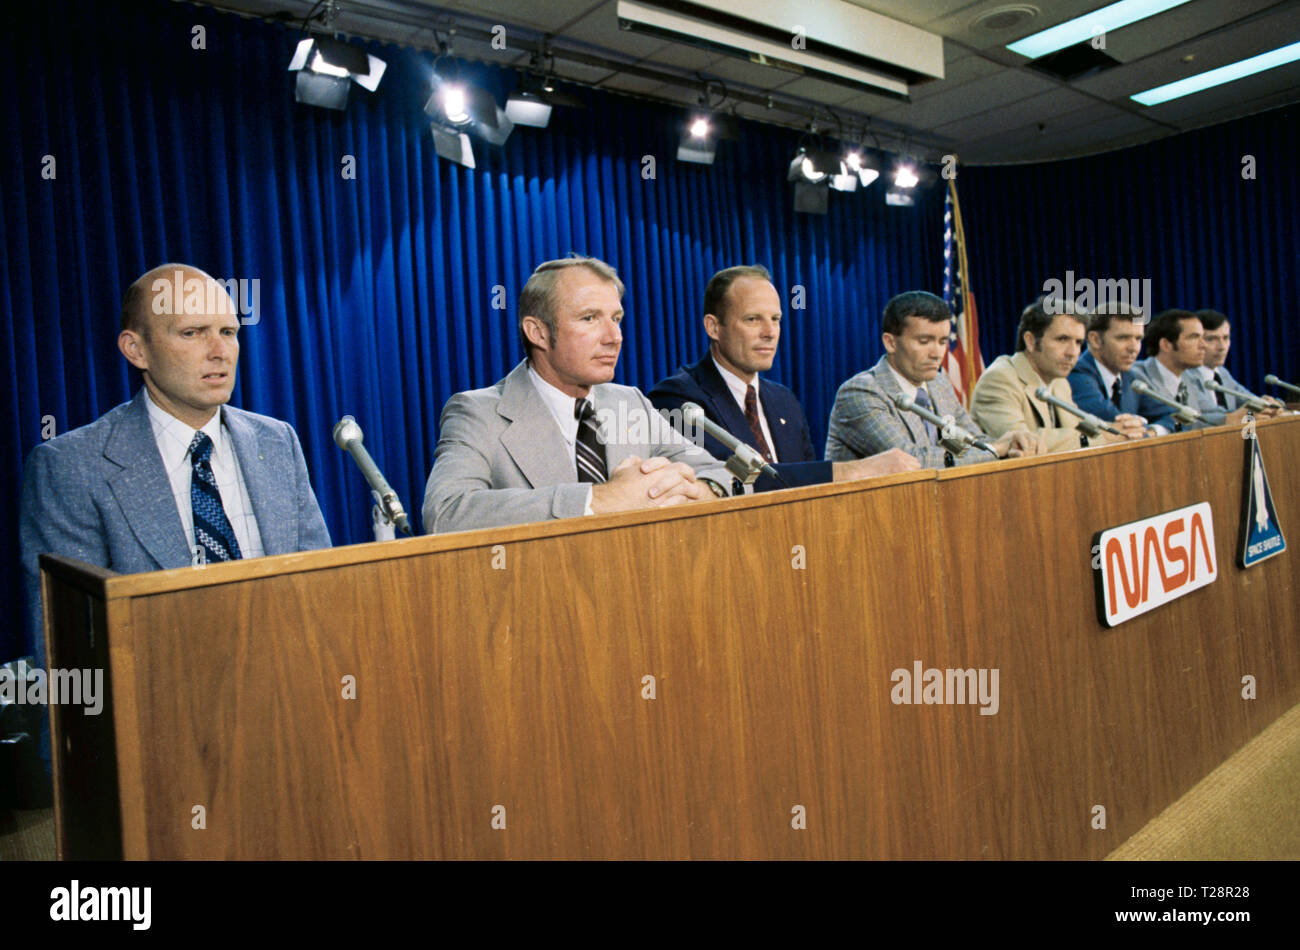 (22 March 1978) --- These eight men have been named on four two-man crews who will fly the space shuttle orbiter vehicle during orbital flight tests (OFT) scheduled to begin in 1979. Pictured during their press conference, right to left, astronauts John W. Young, Robert L. Crippen, Joe H. Engle, Richard H. Truly, Fred W. Haise Jr., Jack R. Lousma, Vance D. Brand and C. Gordon Fullerton. Young and Crippen are commander and pilot, respectively, for the first OFT mission. Other crews are comprised of Engle, commander, and Truly, pilot; Haise, commander, and Lousma, pilot; Brand, commander, and Fu Stock Photo